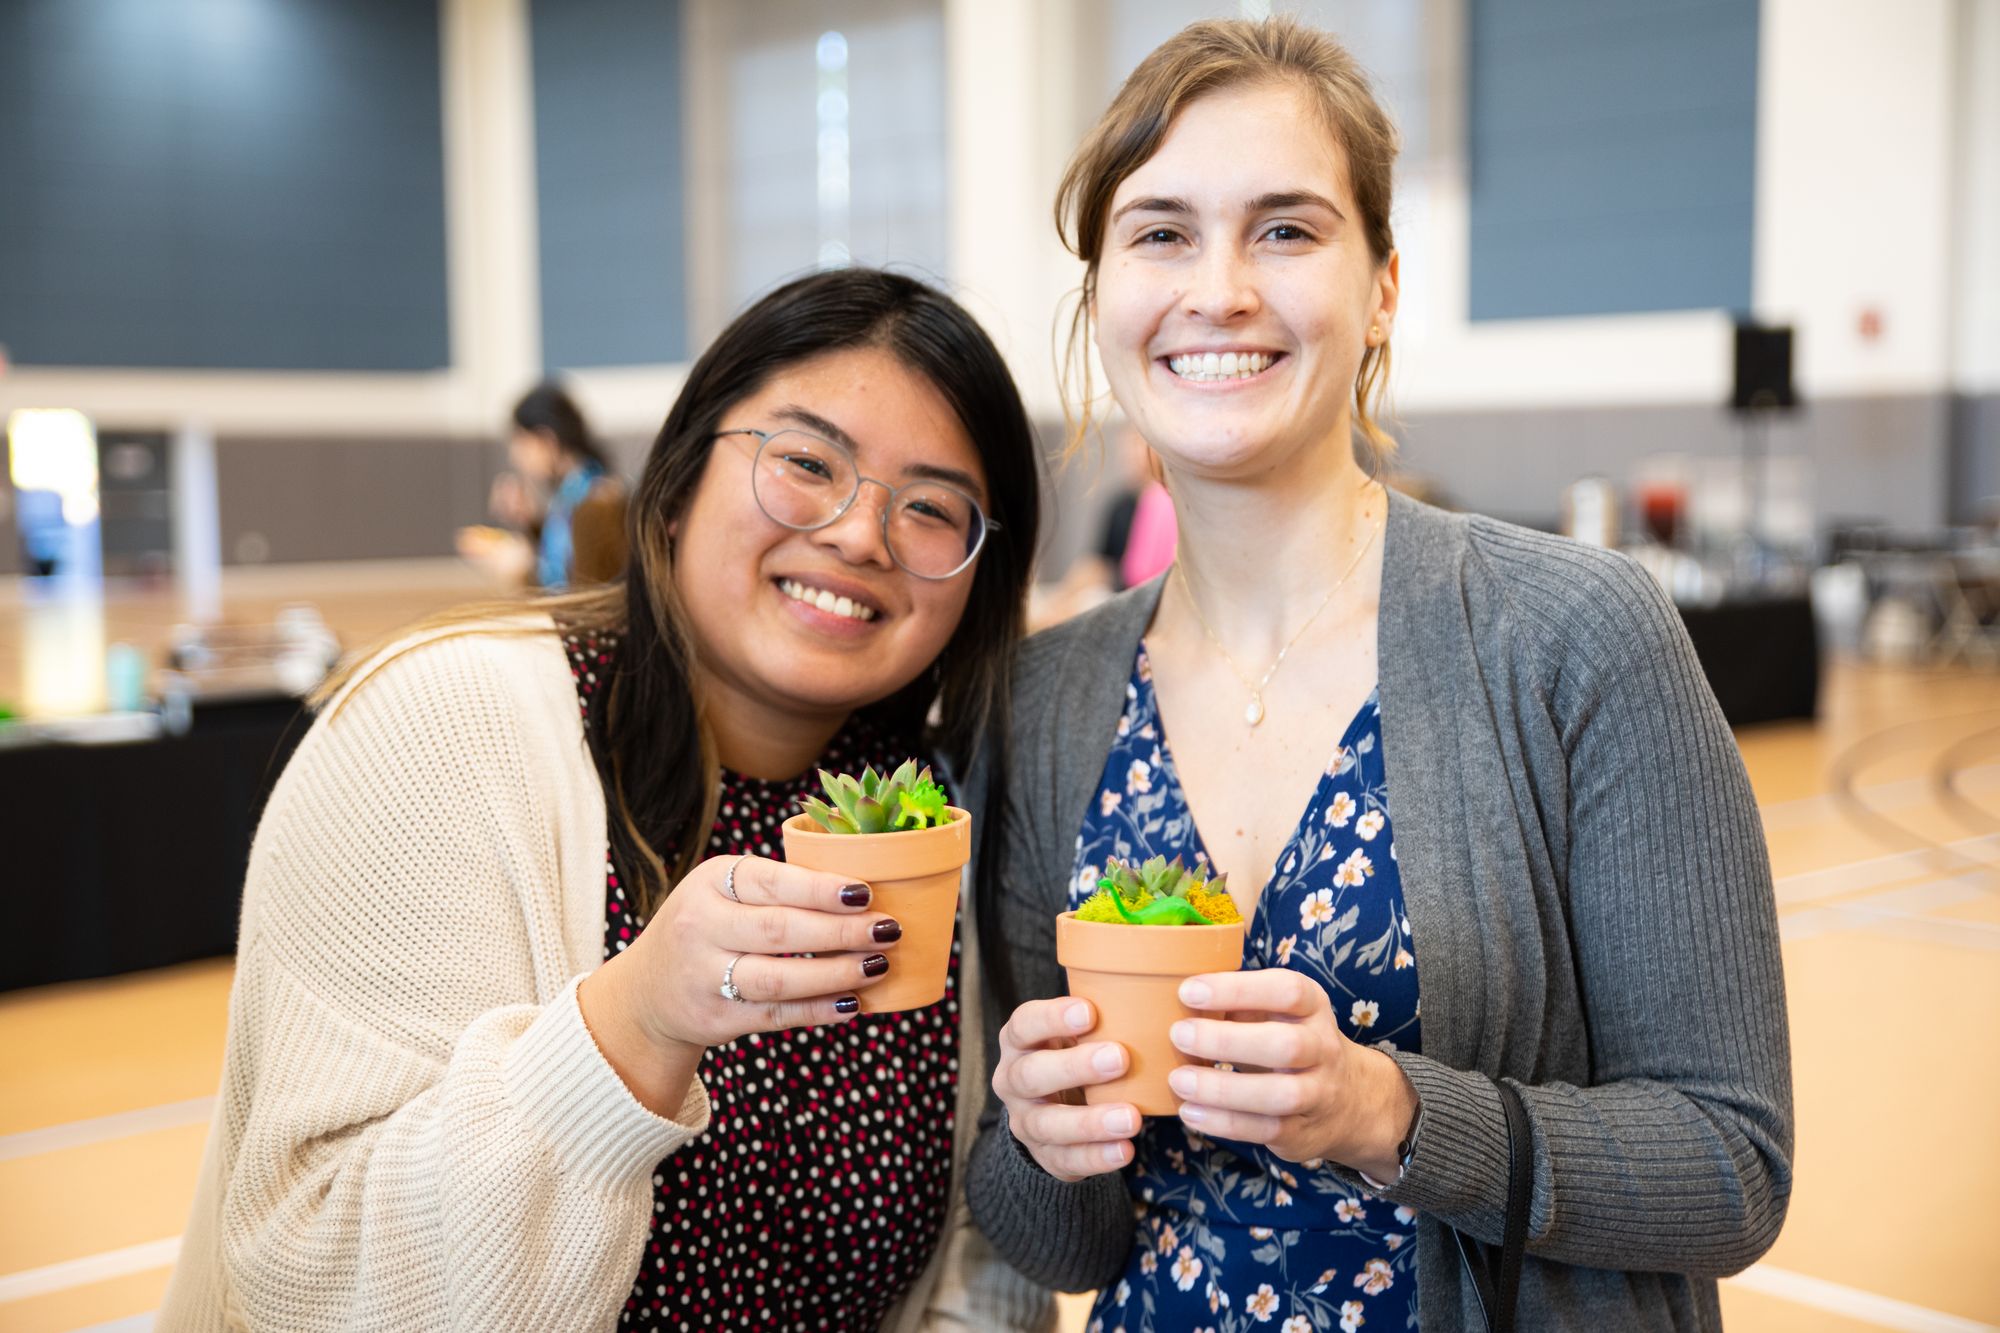 Two female colleagues holding handmade succulent planters